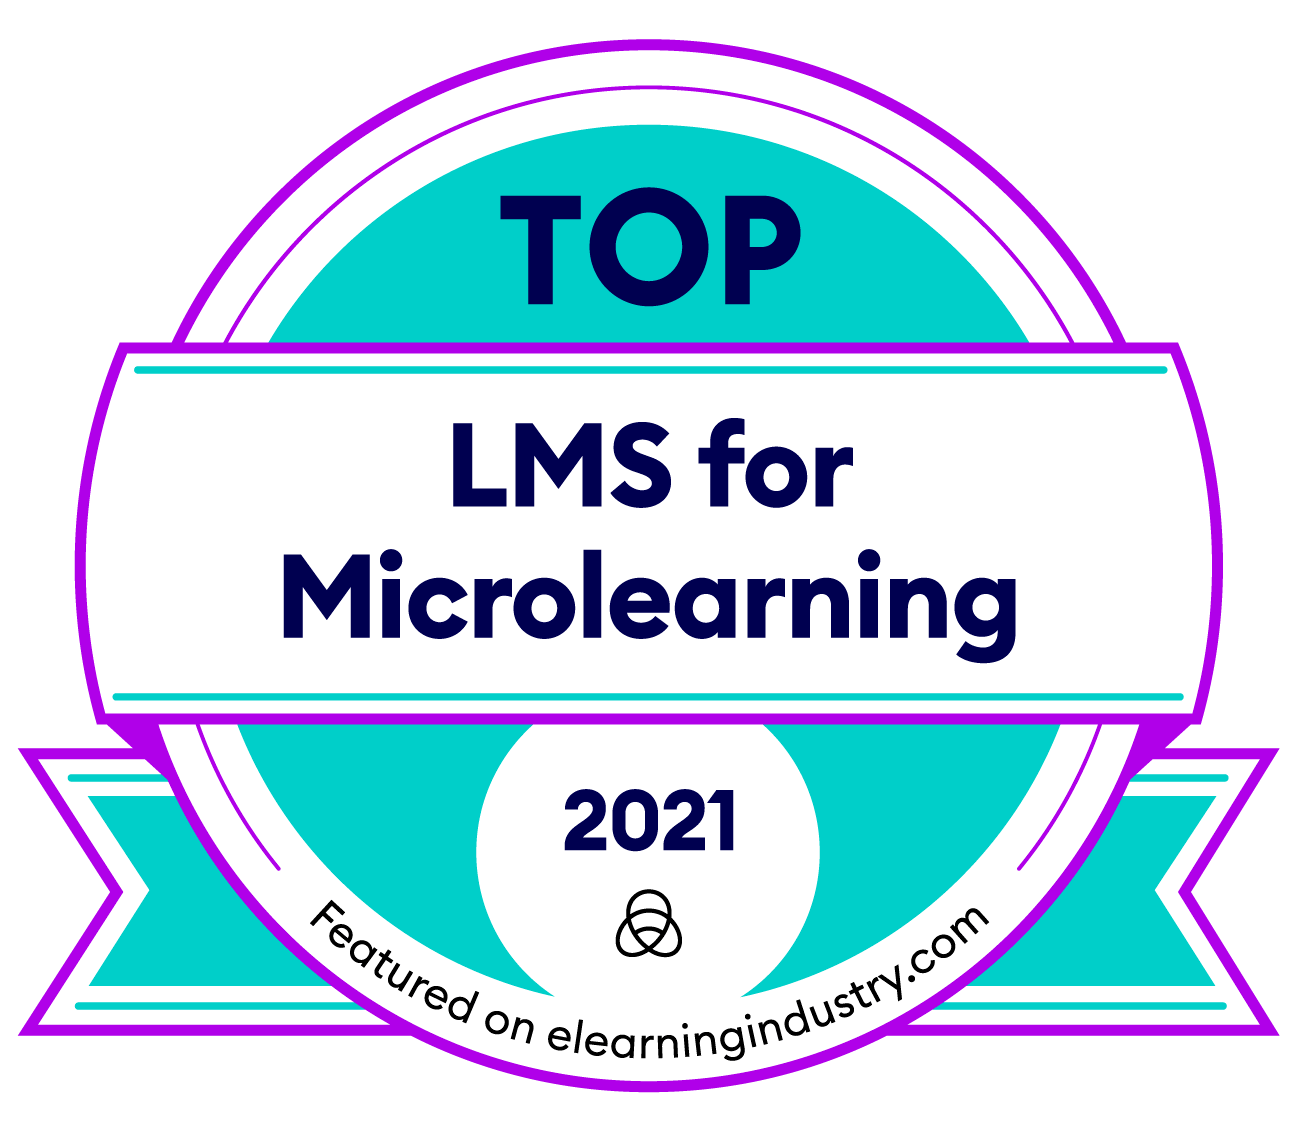 Top LMS for Microlearning